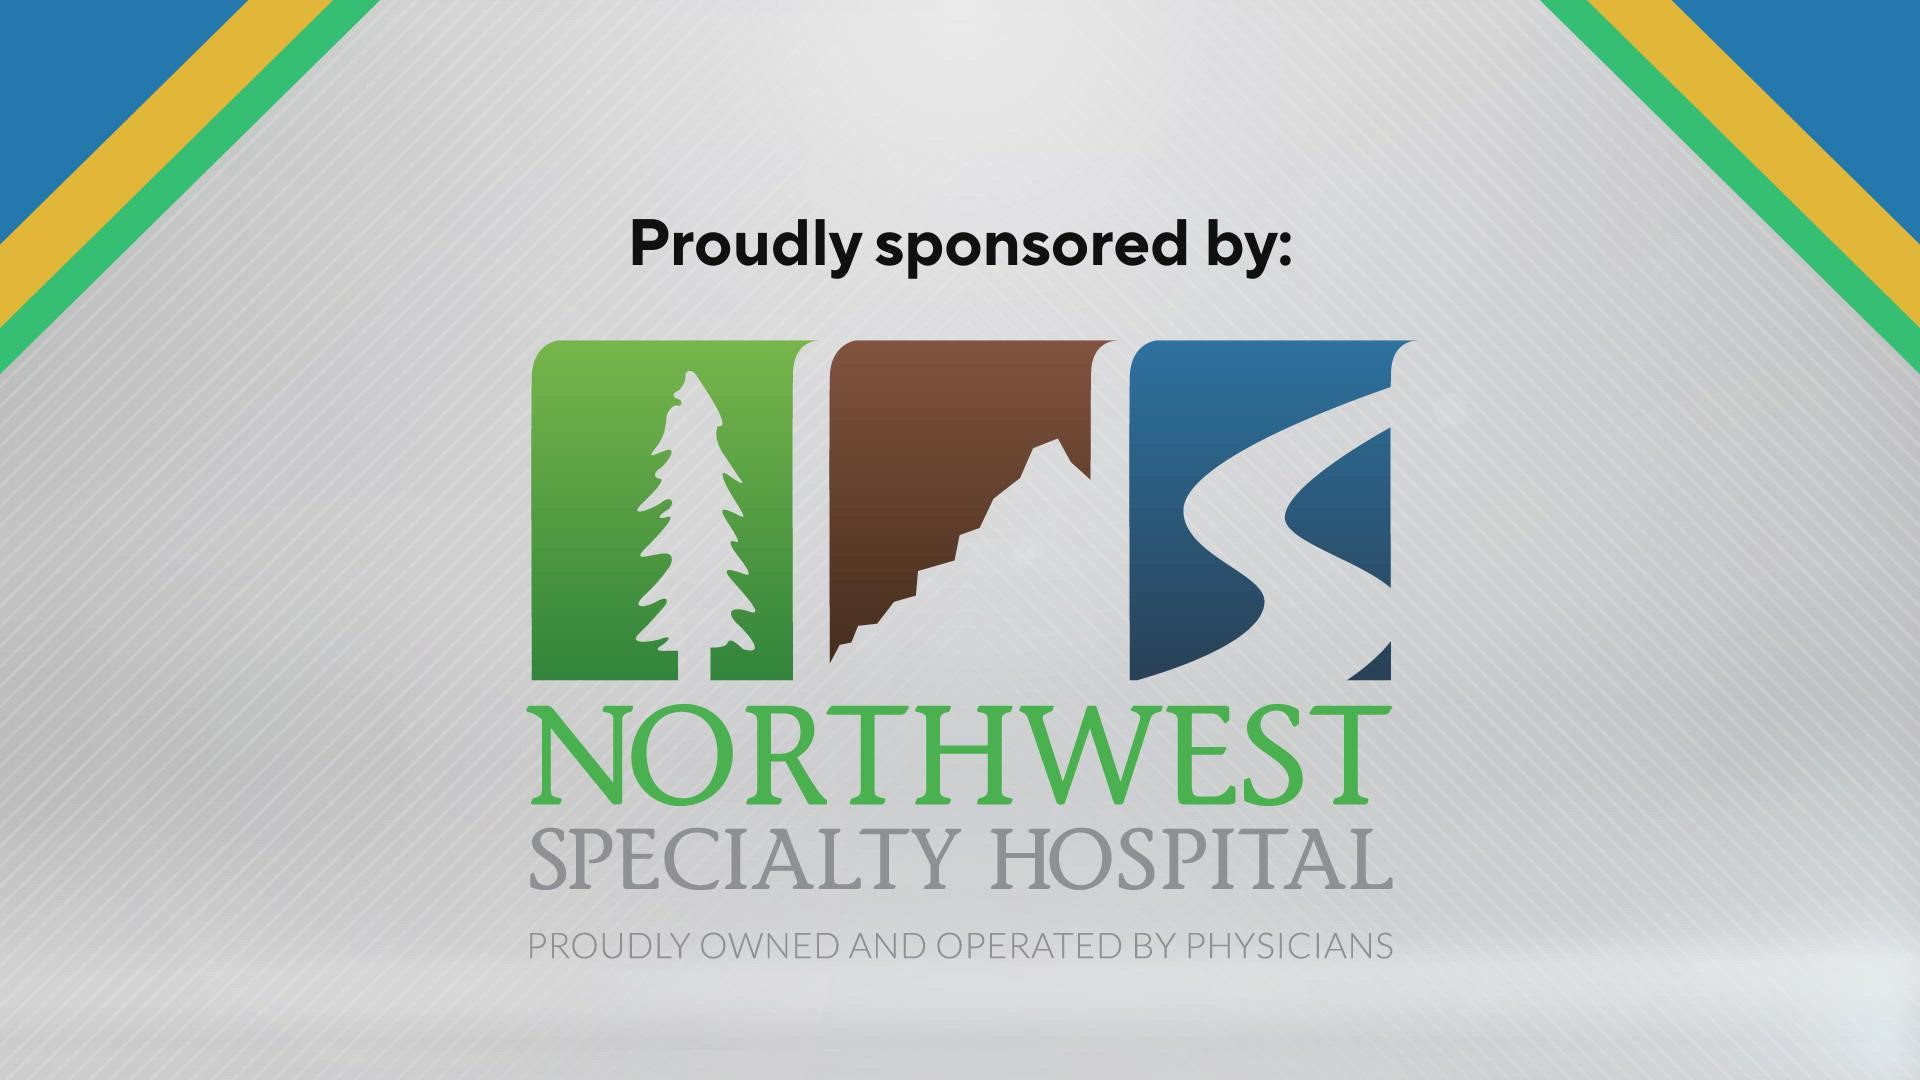 Helping patients live better lives is at the core of everything we do at NWSH.